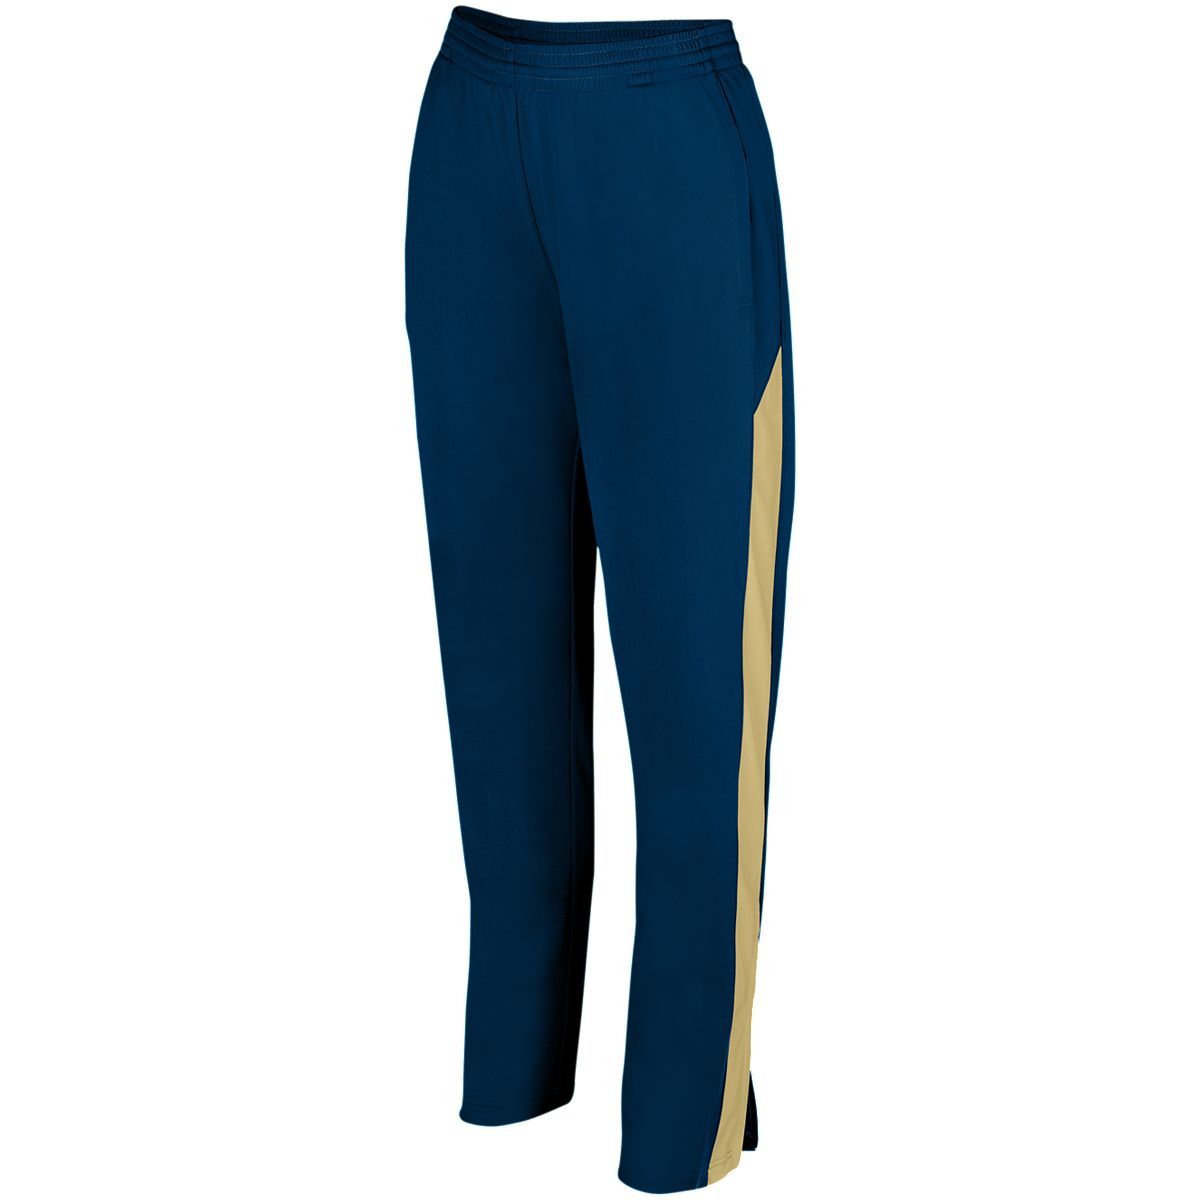 Augusta Sportswear Ladies Medalist Pant 2.0 in Navy/Vegas Gold  -Part of the Ladies, Ladies-Pants, Pants, Augusta-Products product lines at KanaleyCreations.com